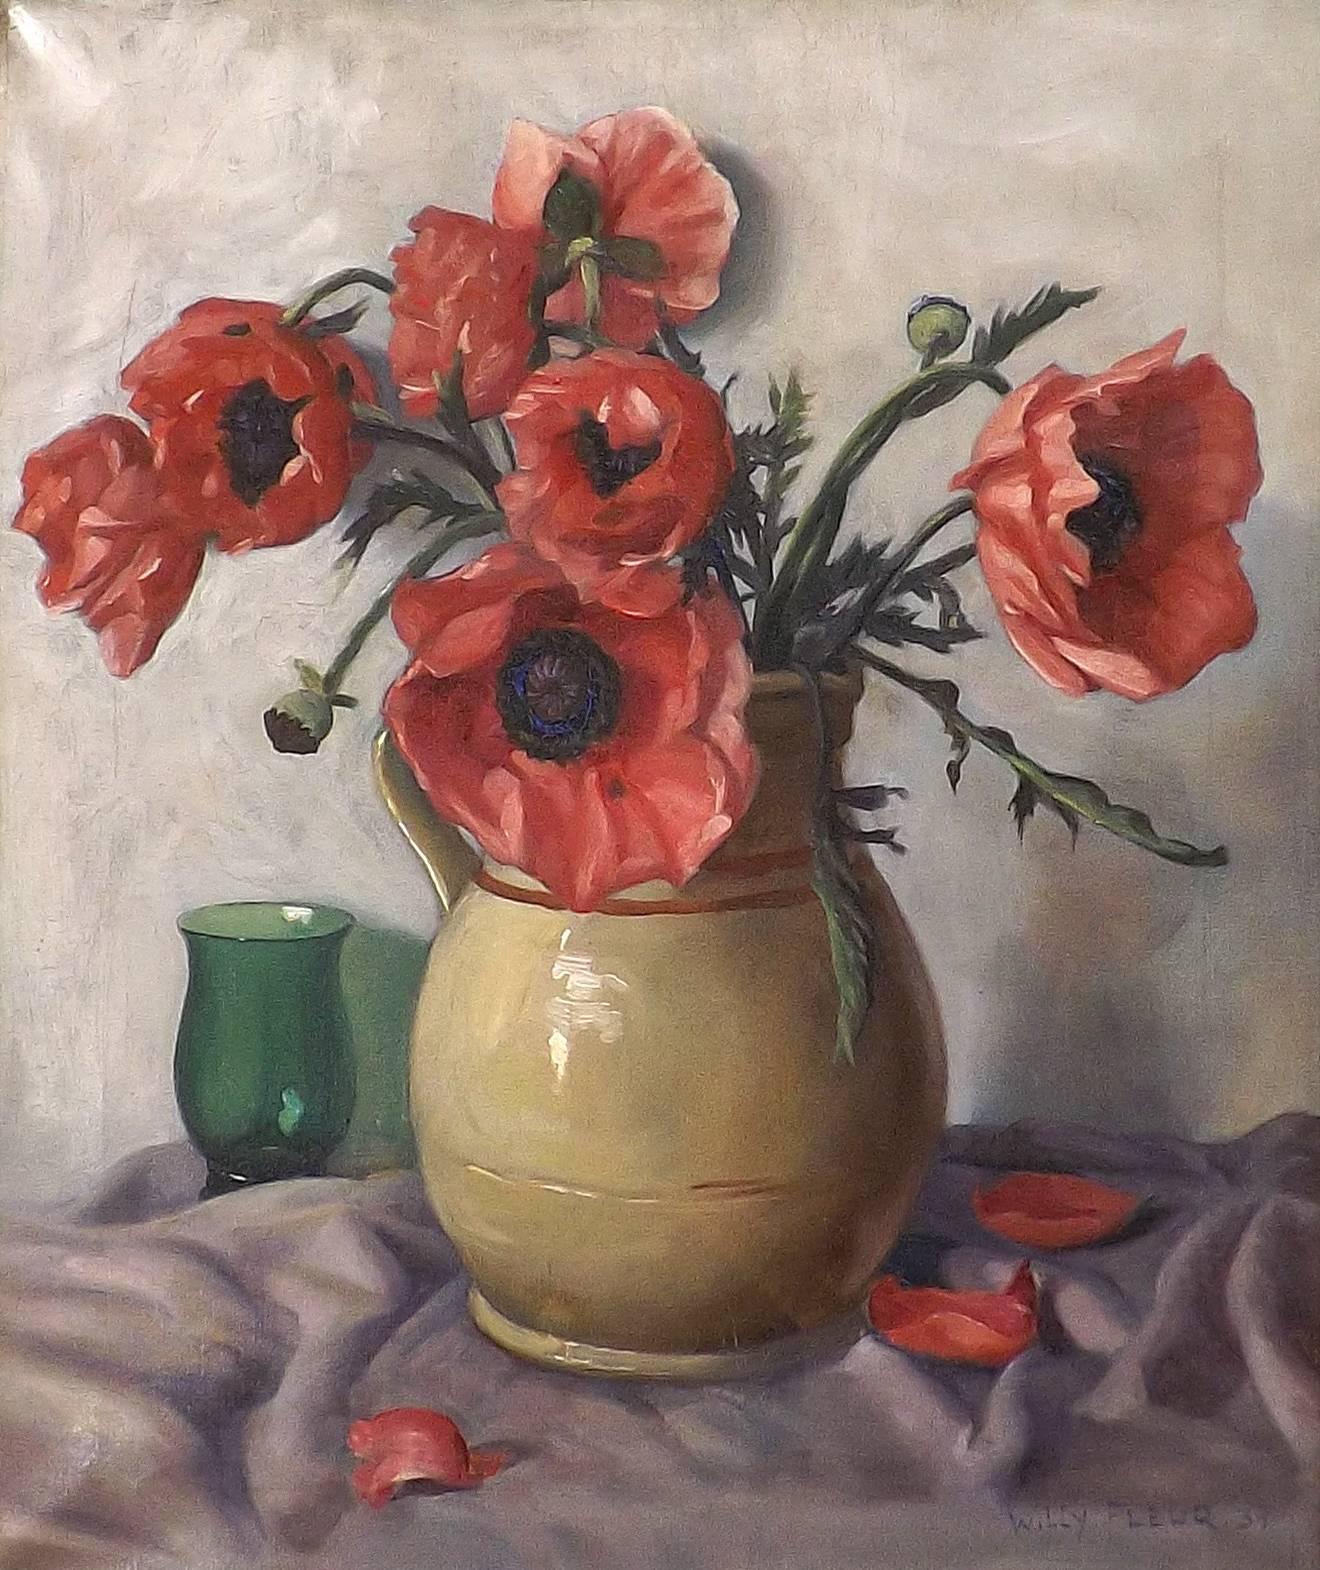 A delightful bouquet of bright red poppies are arranged in an earthenware vase painted by the Dutch artist Johan Willy Fleur. Along with the vase a green glass and fallen petals rest upon a light purple cloth. 

Fleur was born in 1888 in The